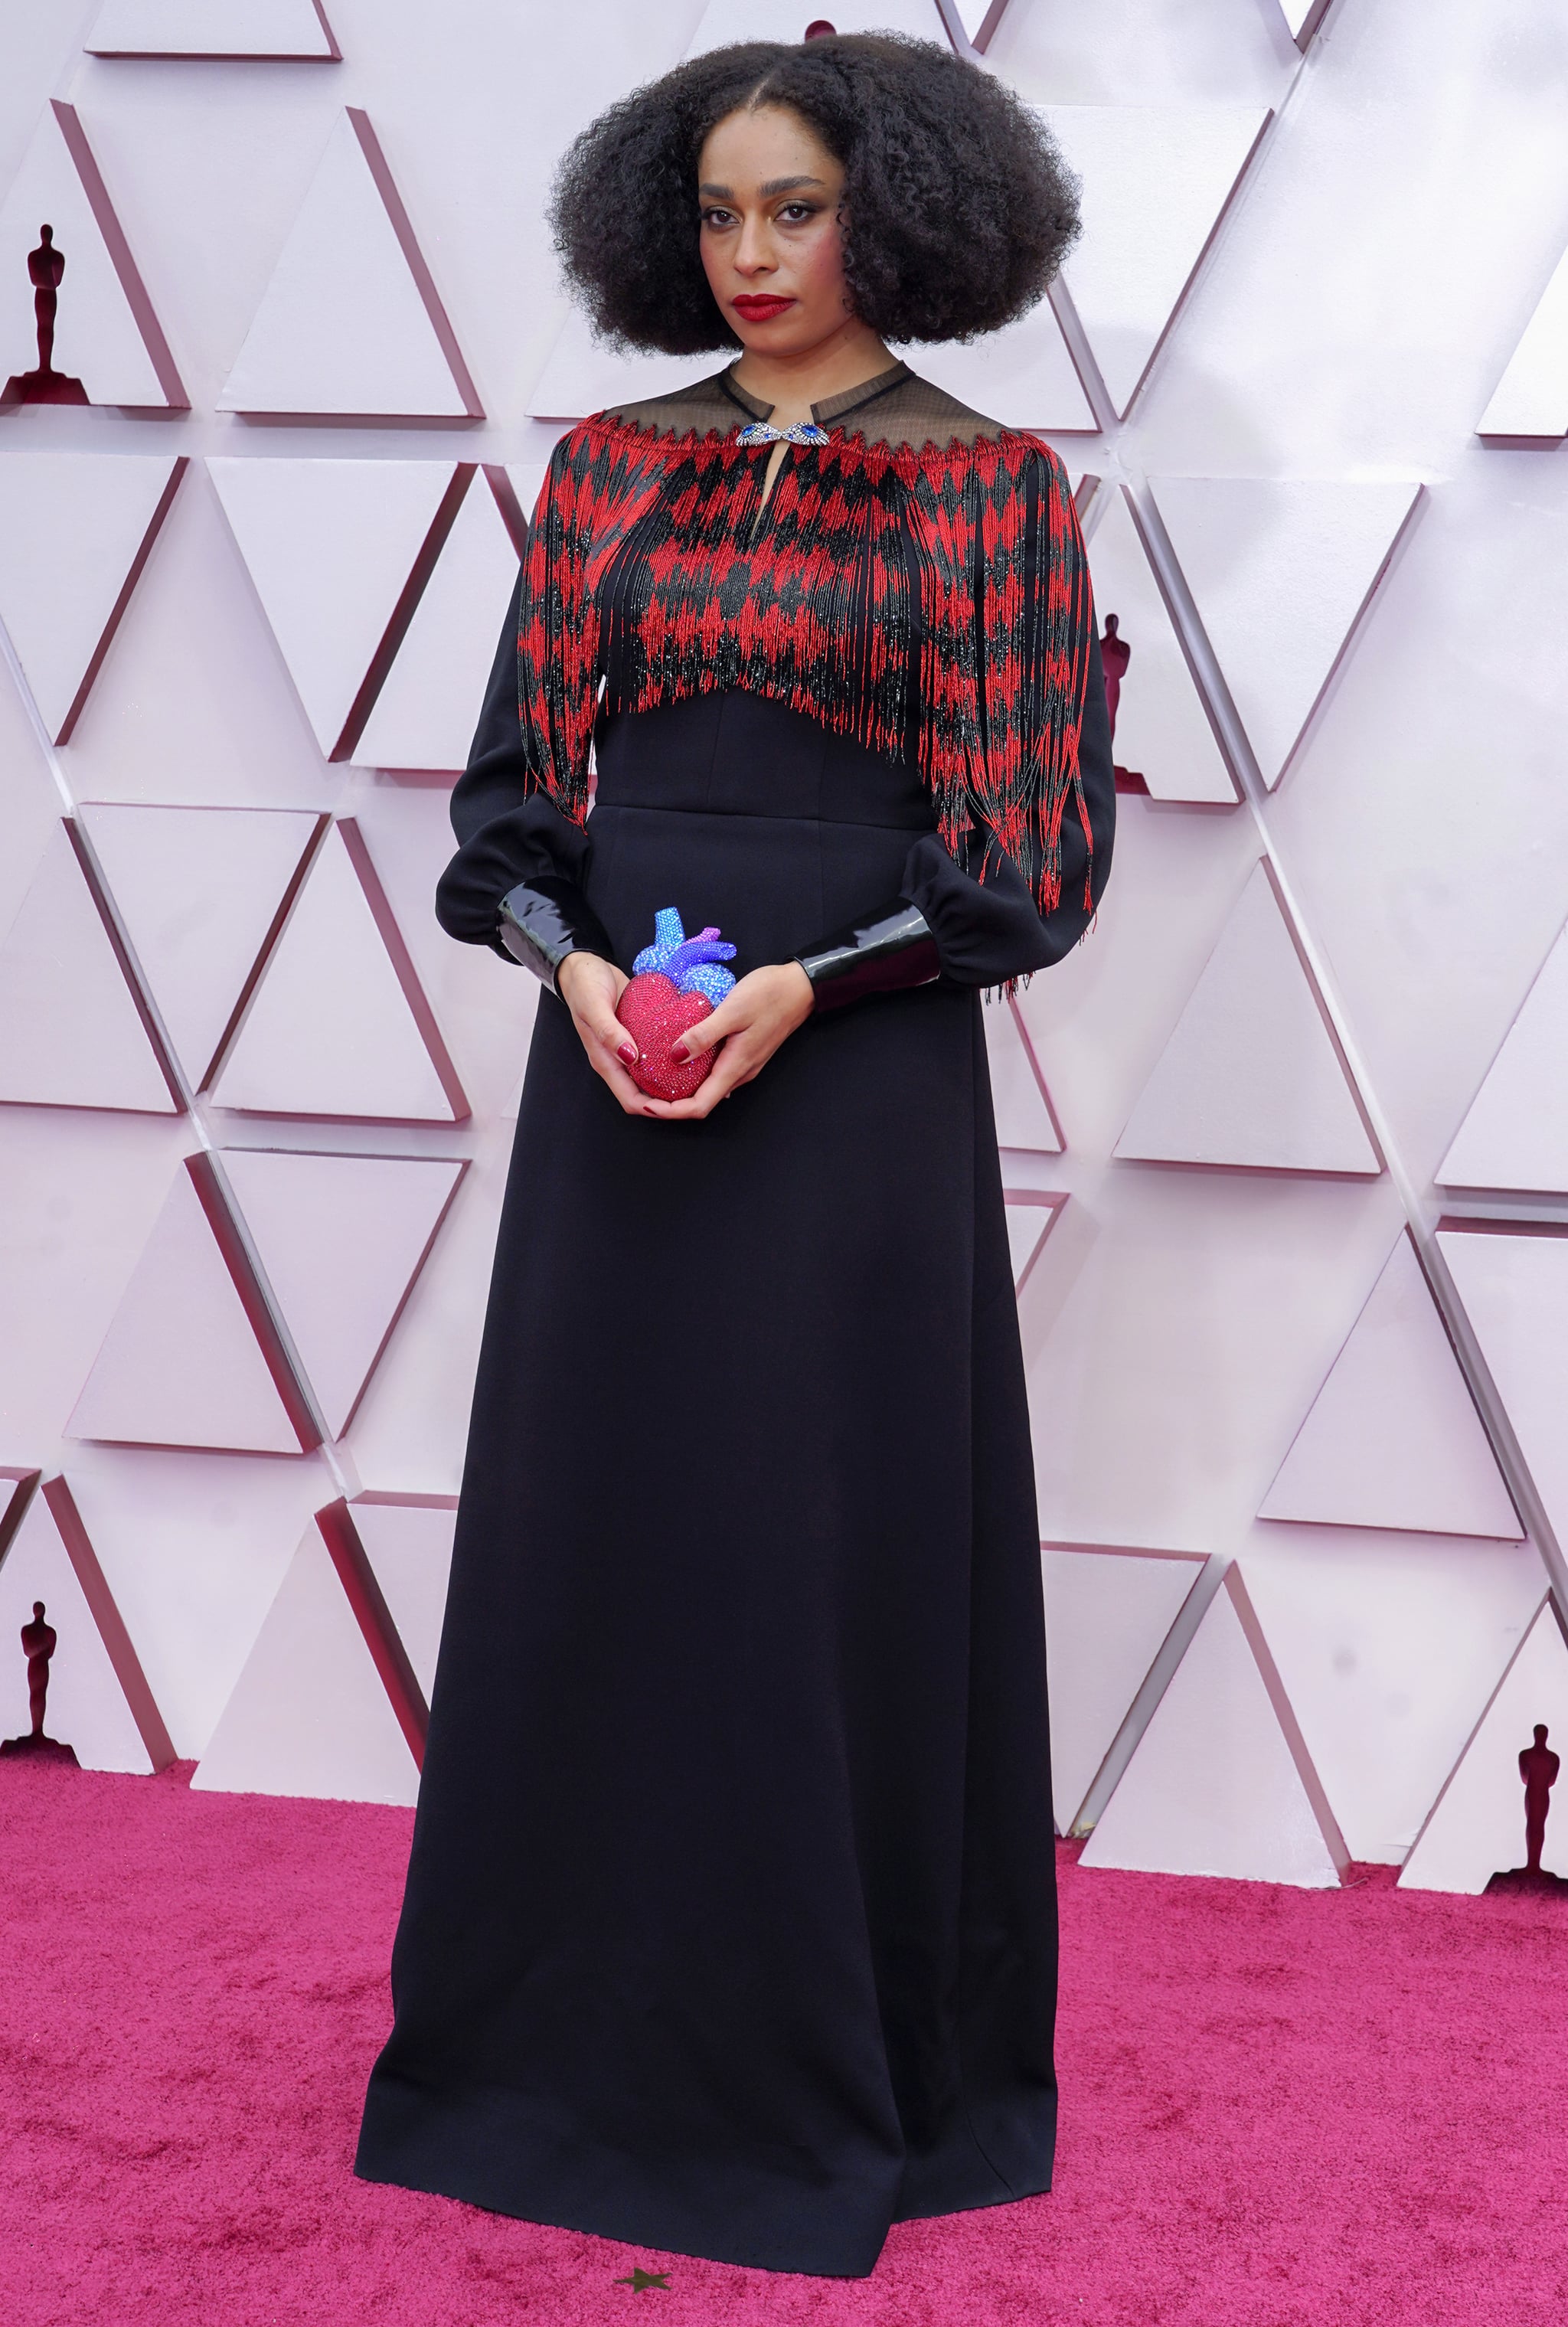 Celeste Waite at the 2021 Oscars | We'd Like to Thank the Academy For Letting Us Witness These 2021 Oscars Red Carpet Looks | POPSUGAR Fashion Photo 19